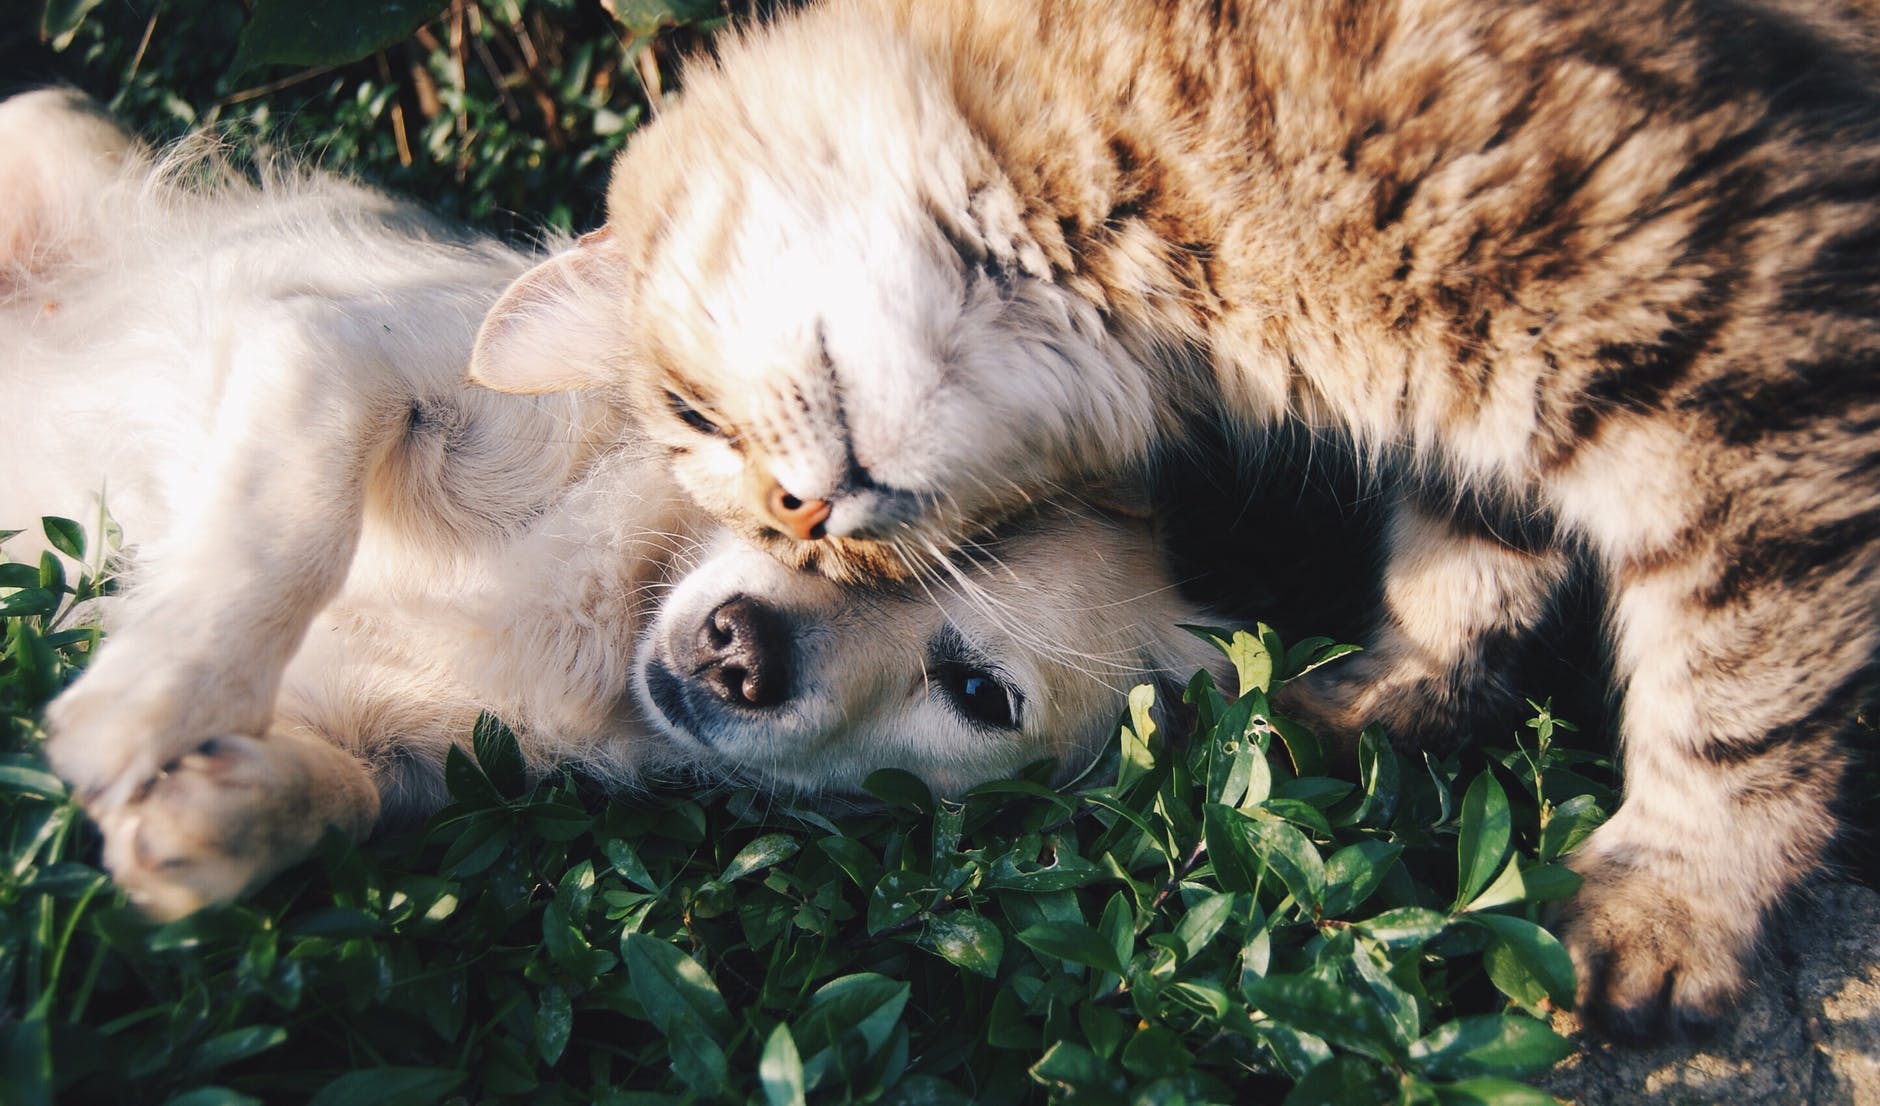 Are Dogs Better than Cats? How Easy is it to Love Both Pets?